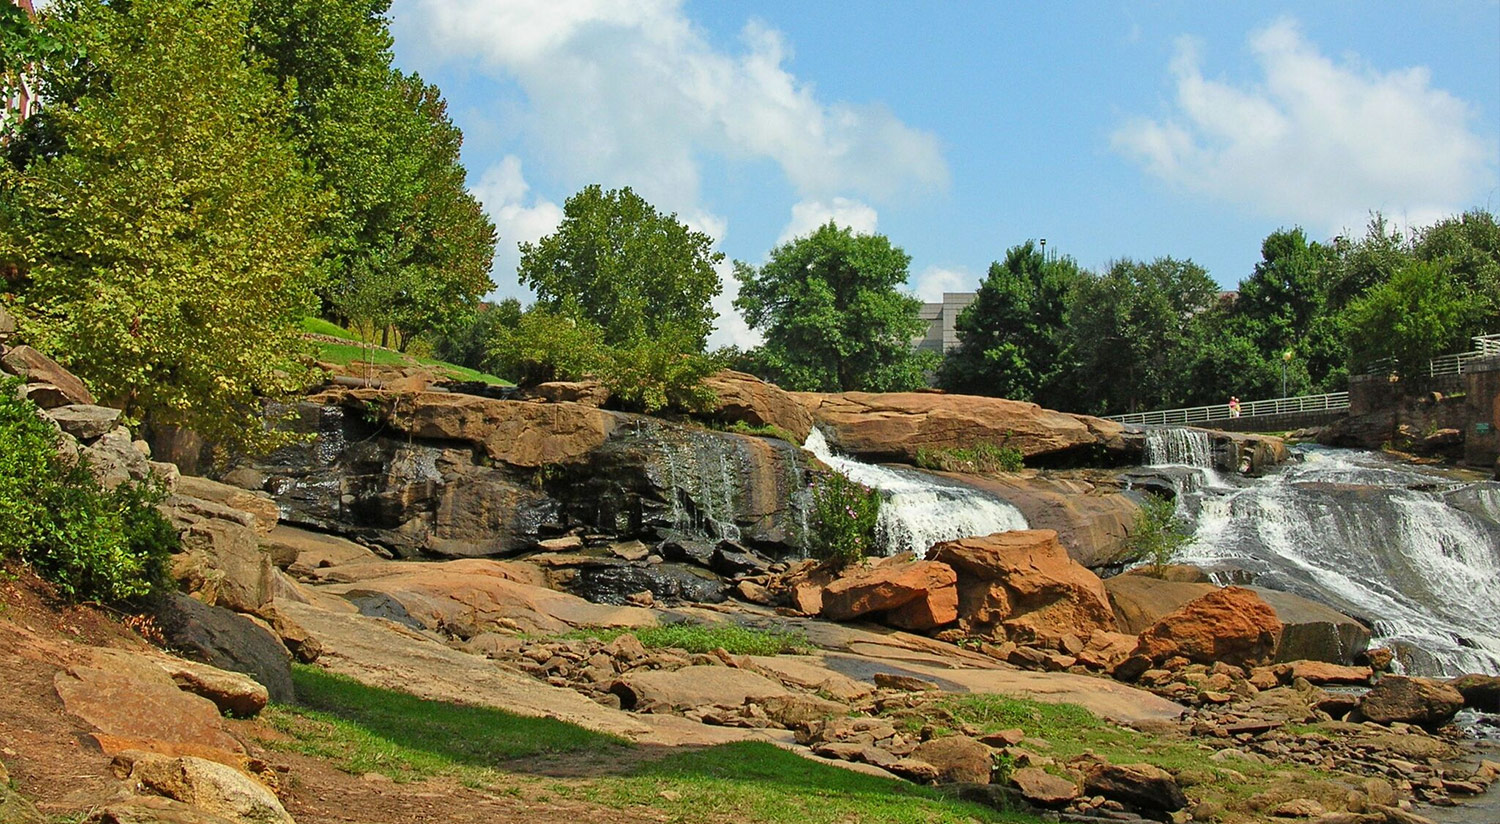 OUR IDEAL LOCATION IS NEAR DOWNTOWN GREENVILLE AND TOP AREA ATTRACTIONS